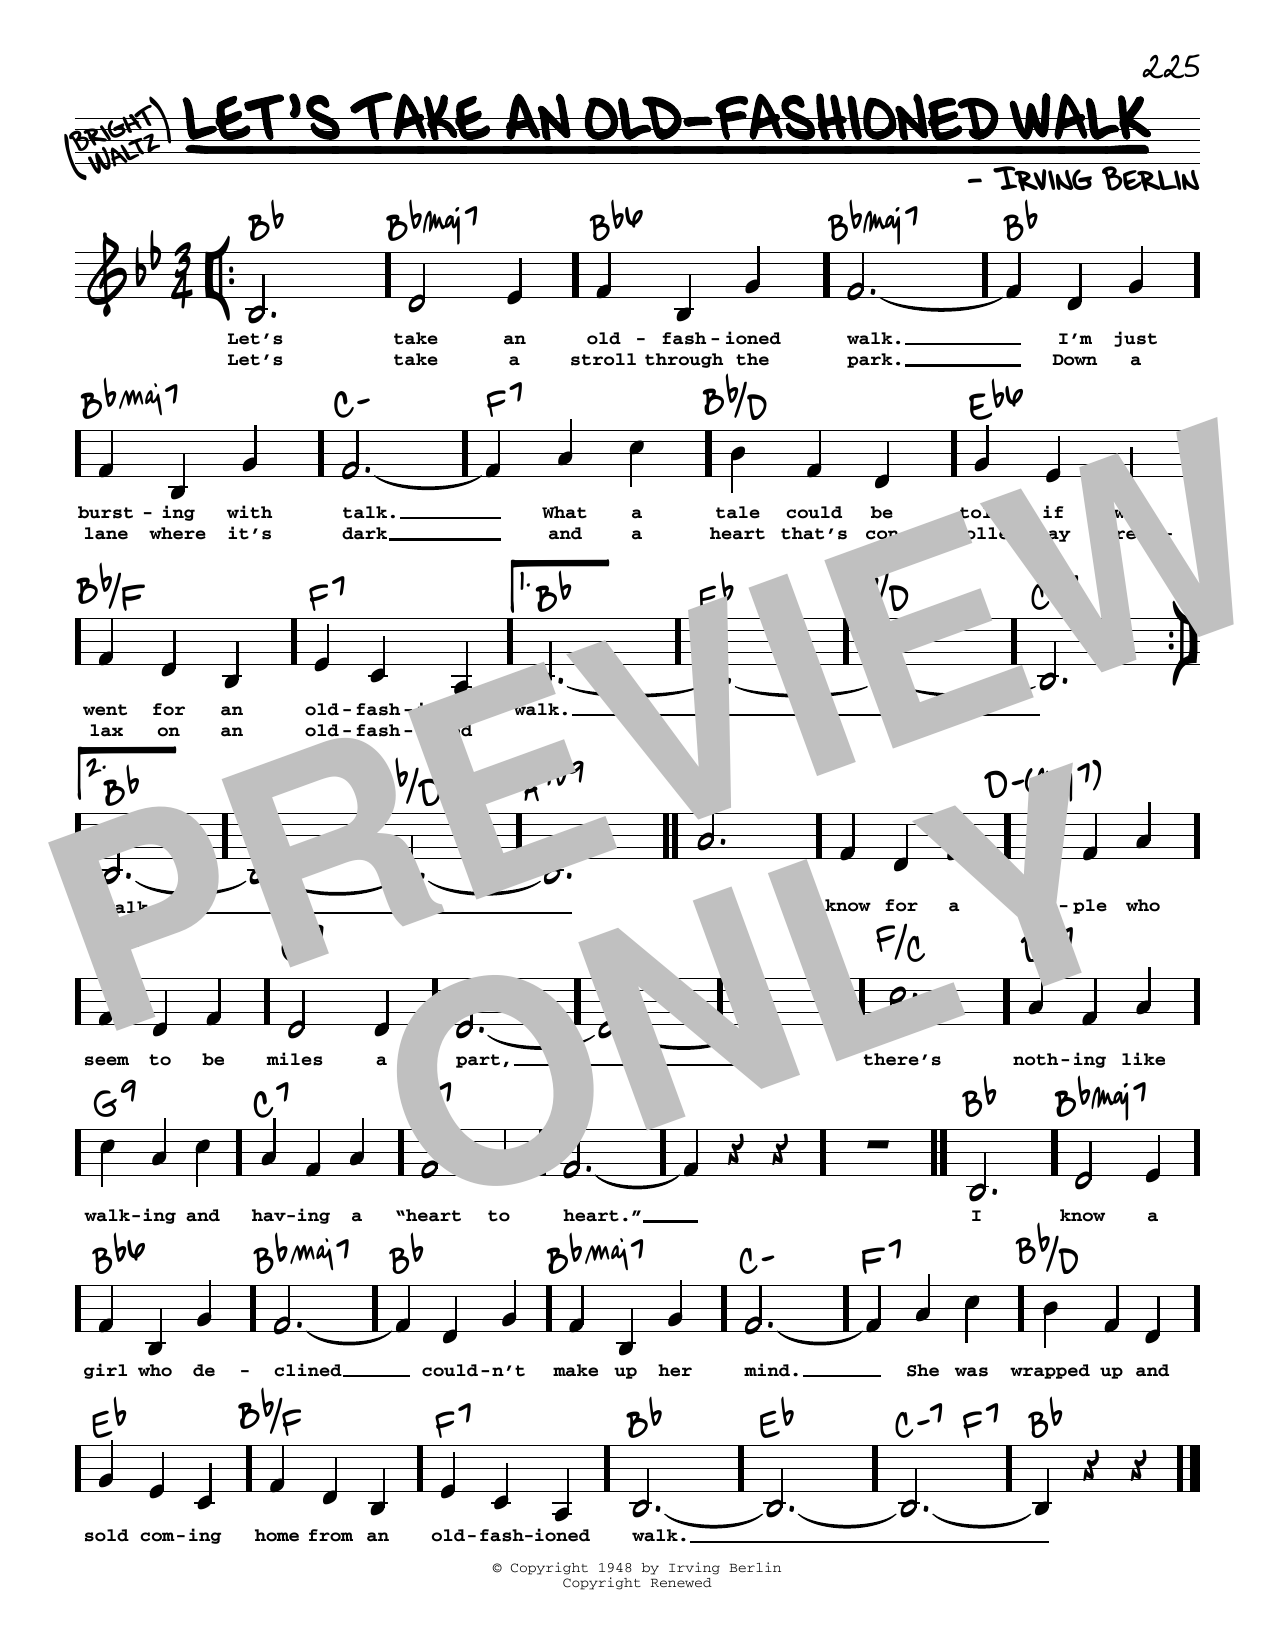 Irving Berlin Let's Take An Old-Fashioned Walk (Low Voice) sheet music notes printable PDF score